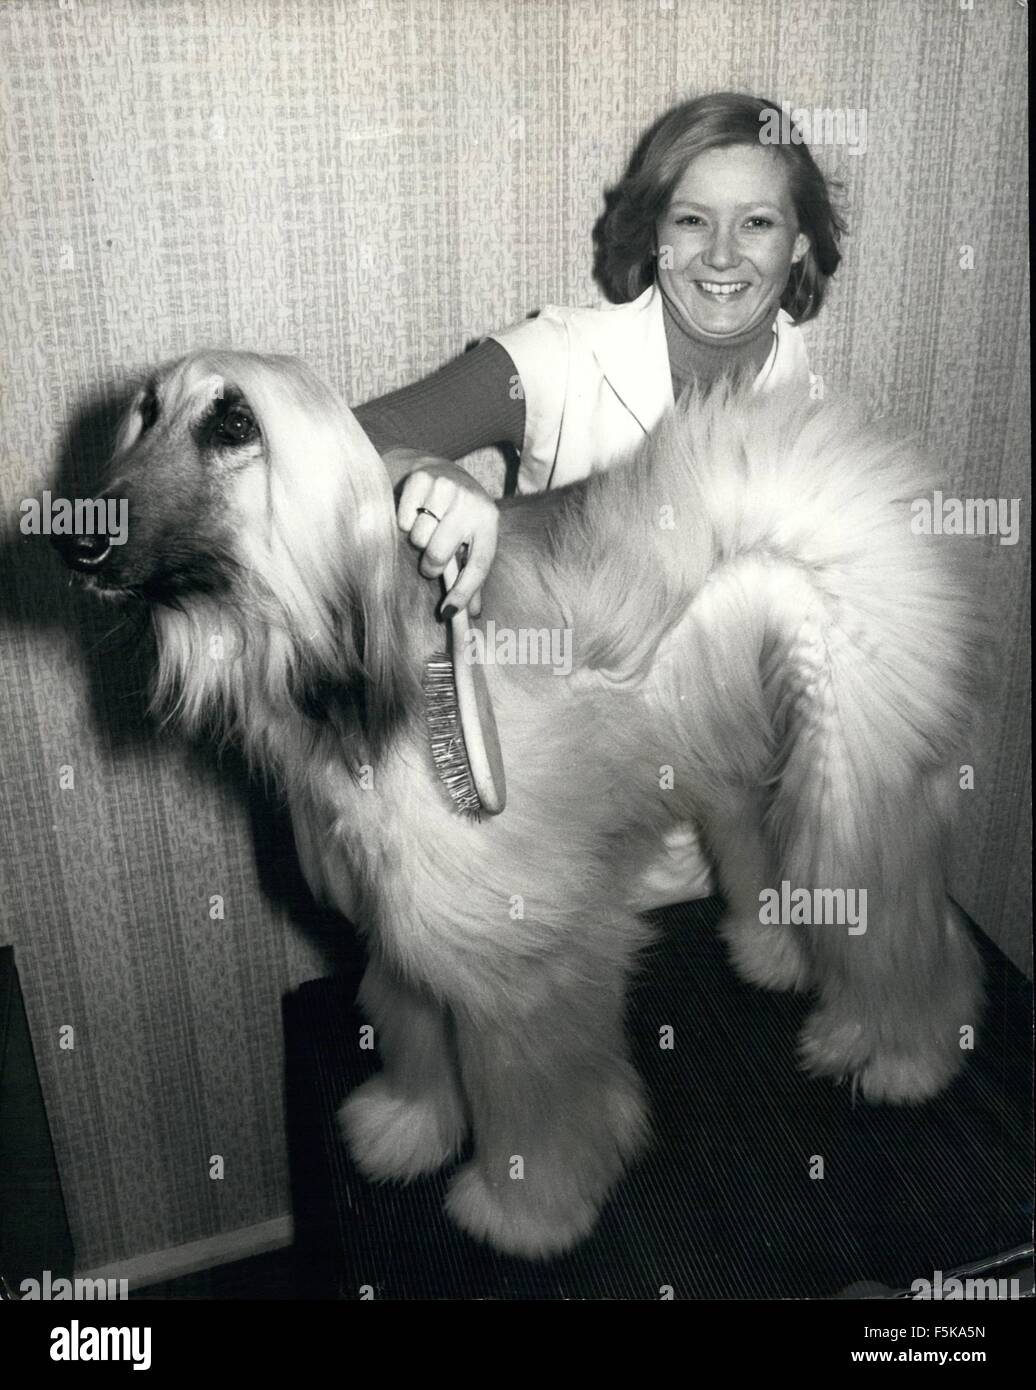 1978 - Hair do you do : Don' worry by Friday February 10 th when the supreme of all dog championships ''Crufts'' takes pale at Olympia, ''Jinny'' a 19 month-old afghan hound will be ready to take up her place as an entrant. Owner handler 23 year -old Gail Bond is just as excited as Jinny, as it has been her ambition to enter the dog in crufts ever since she first bred her. At the moment they both seem to be in a bit of a fizz but it will come tout over the next six hours preparation washing and brushing her for the big day. With the 1978 crufts dog championships having a record entry of 10,016 Stock Photo